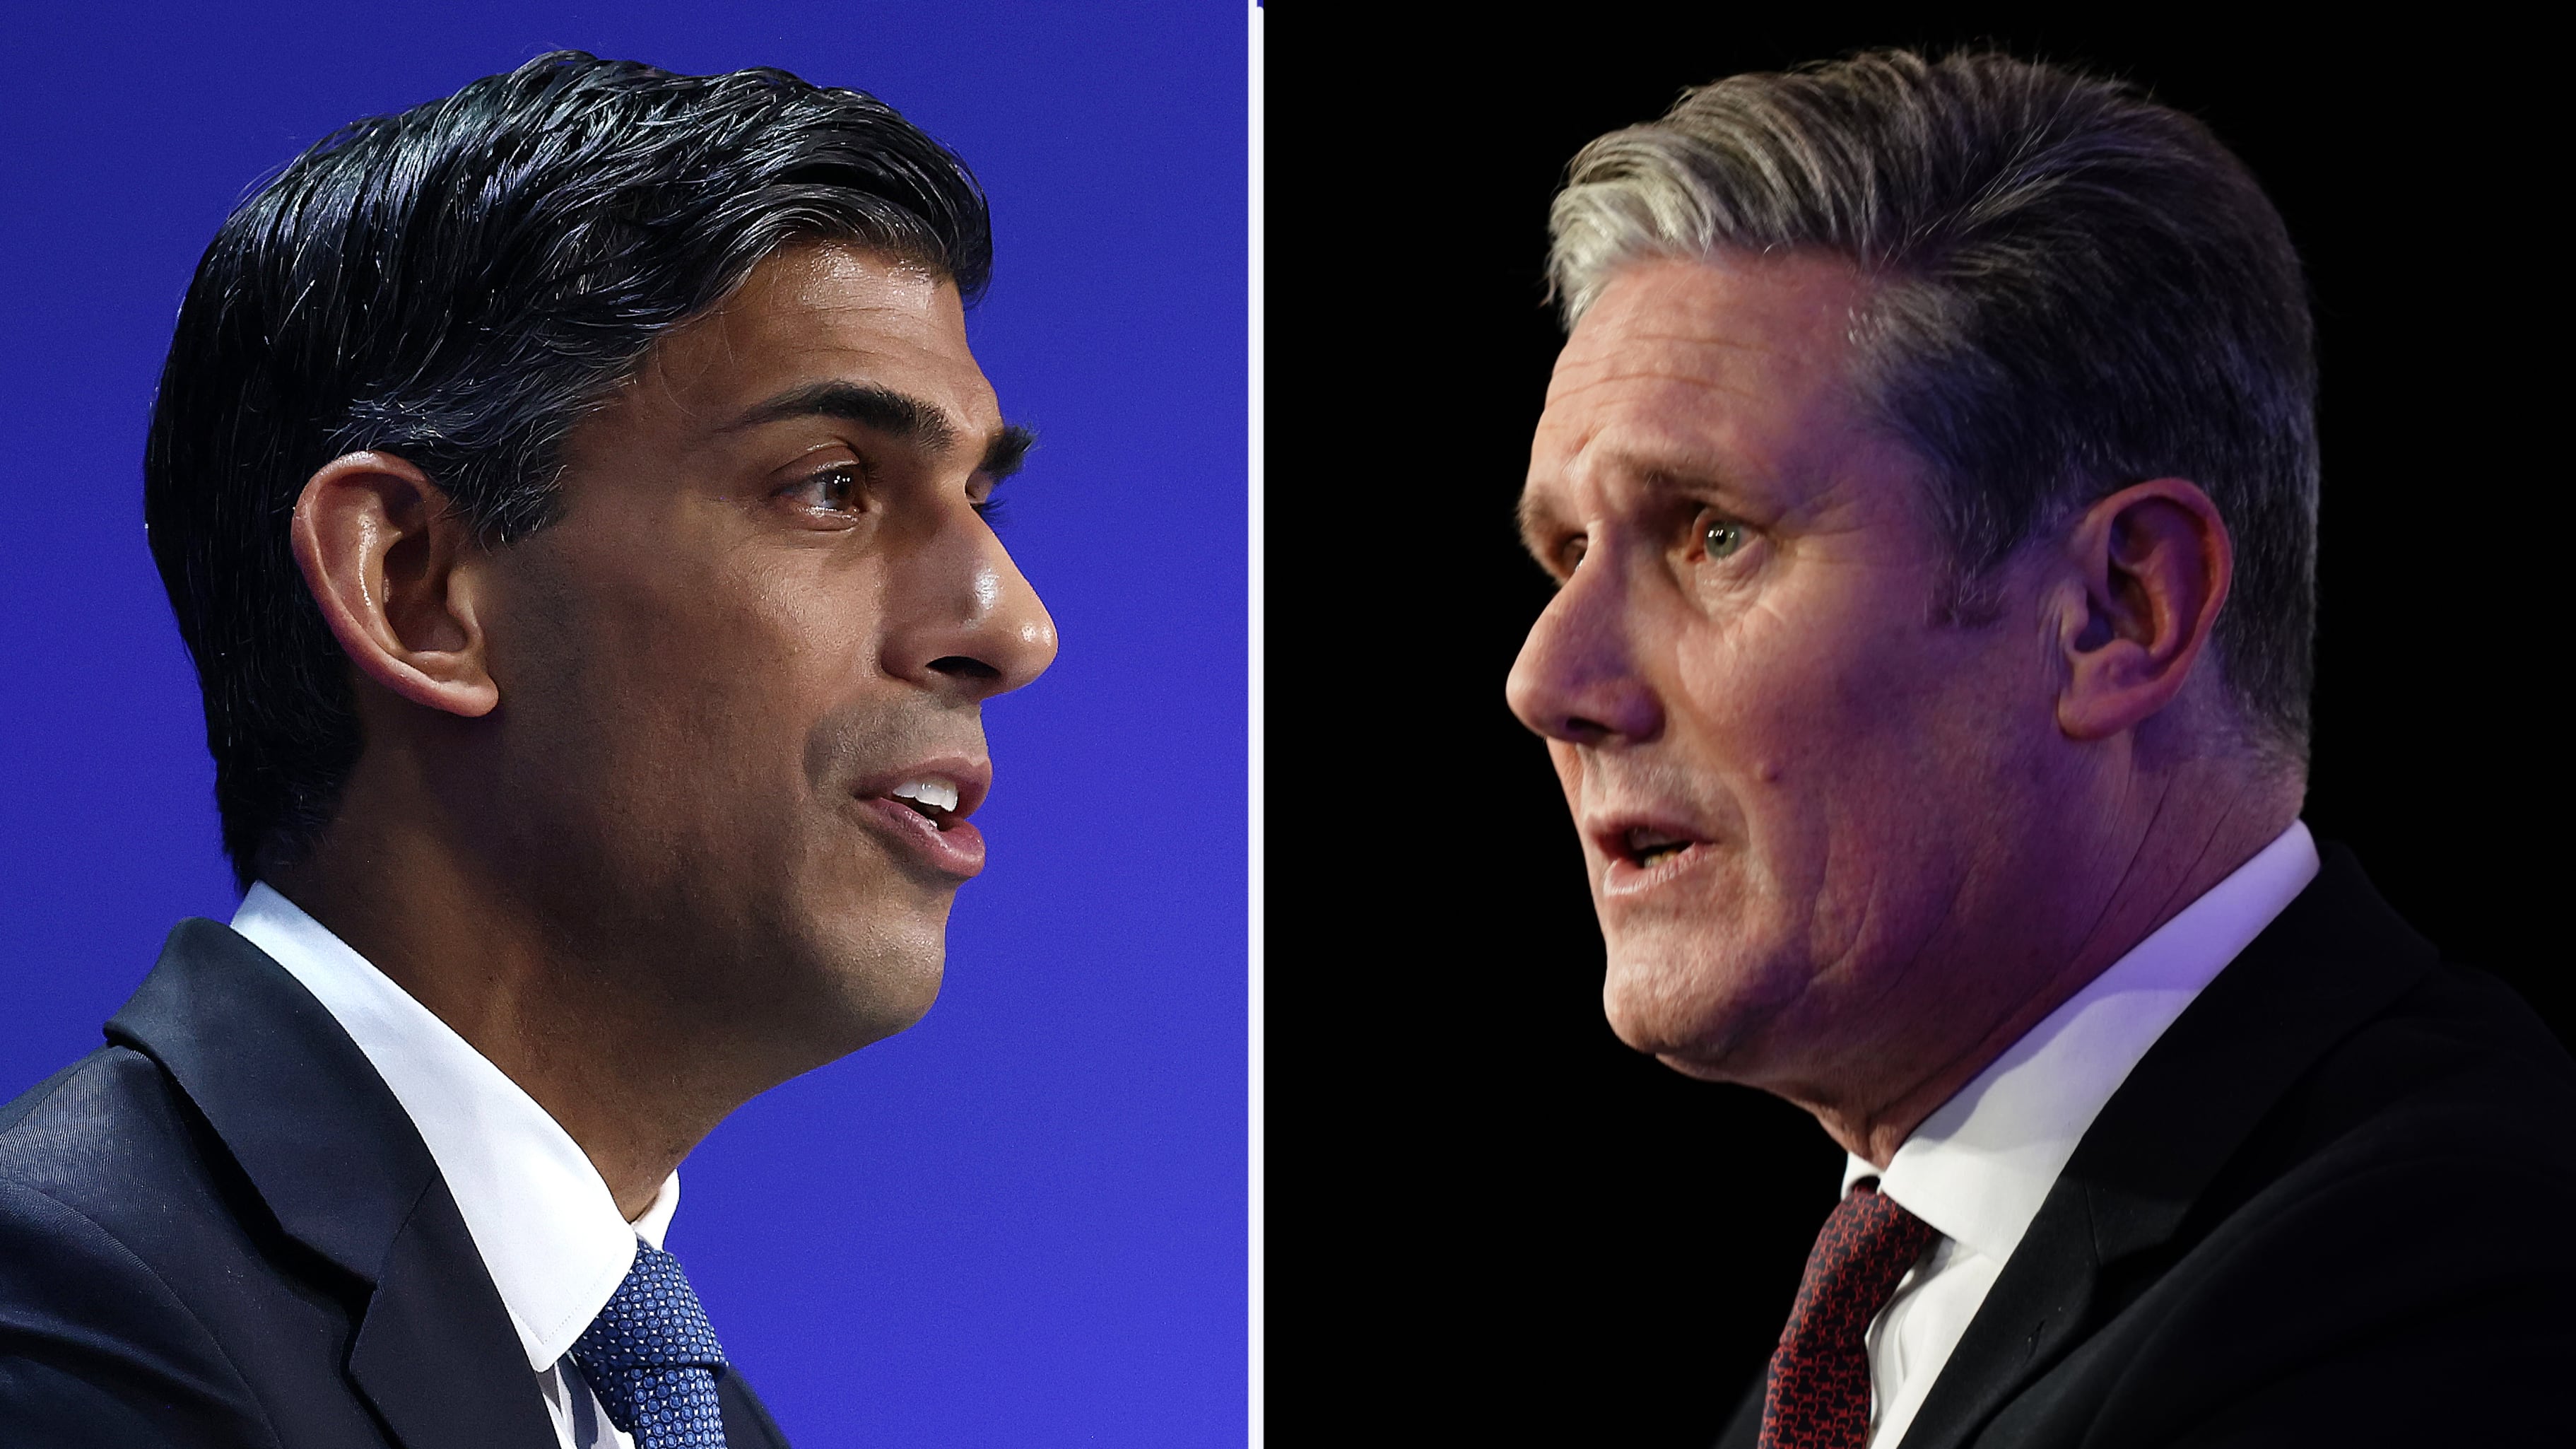 Rishi Sunak will be campaign in the Midlands while Sir Keir Starmer is in south-east England on Monday